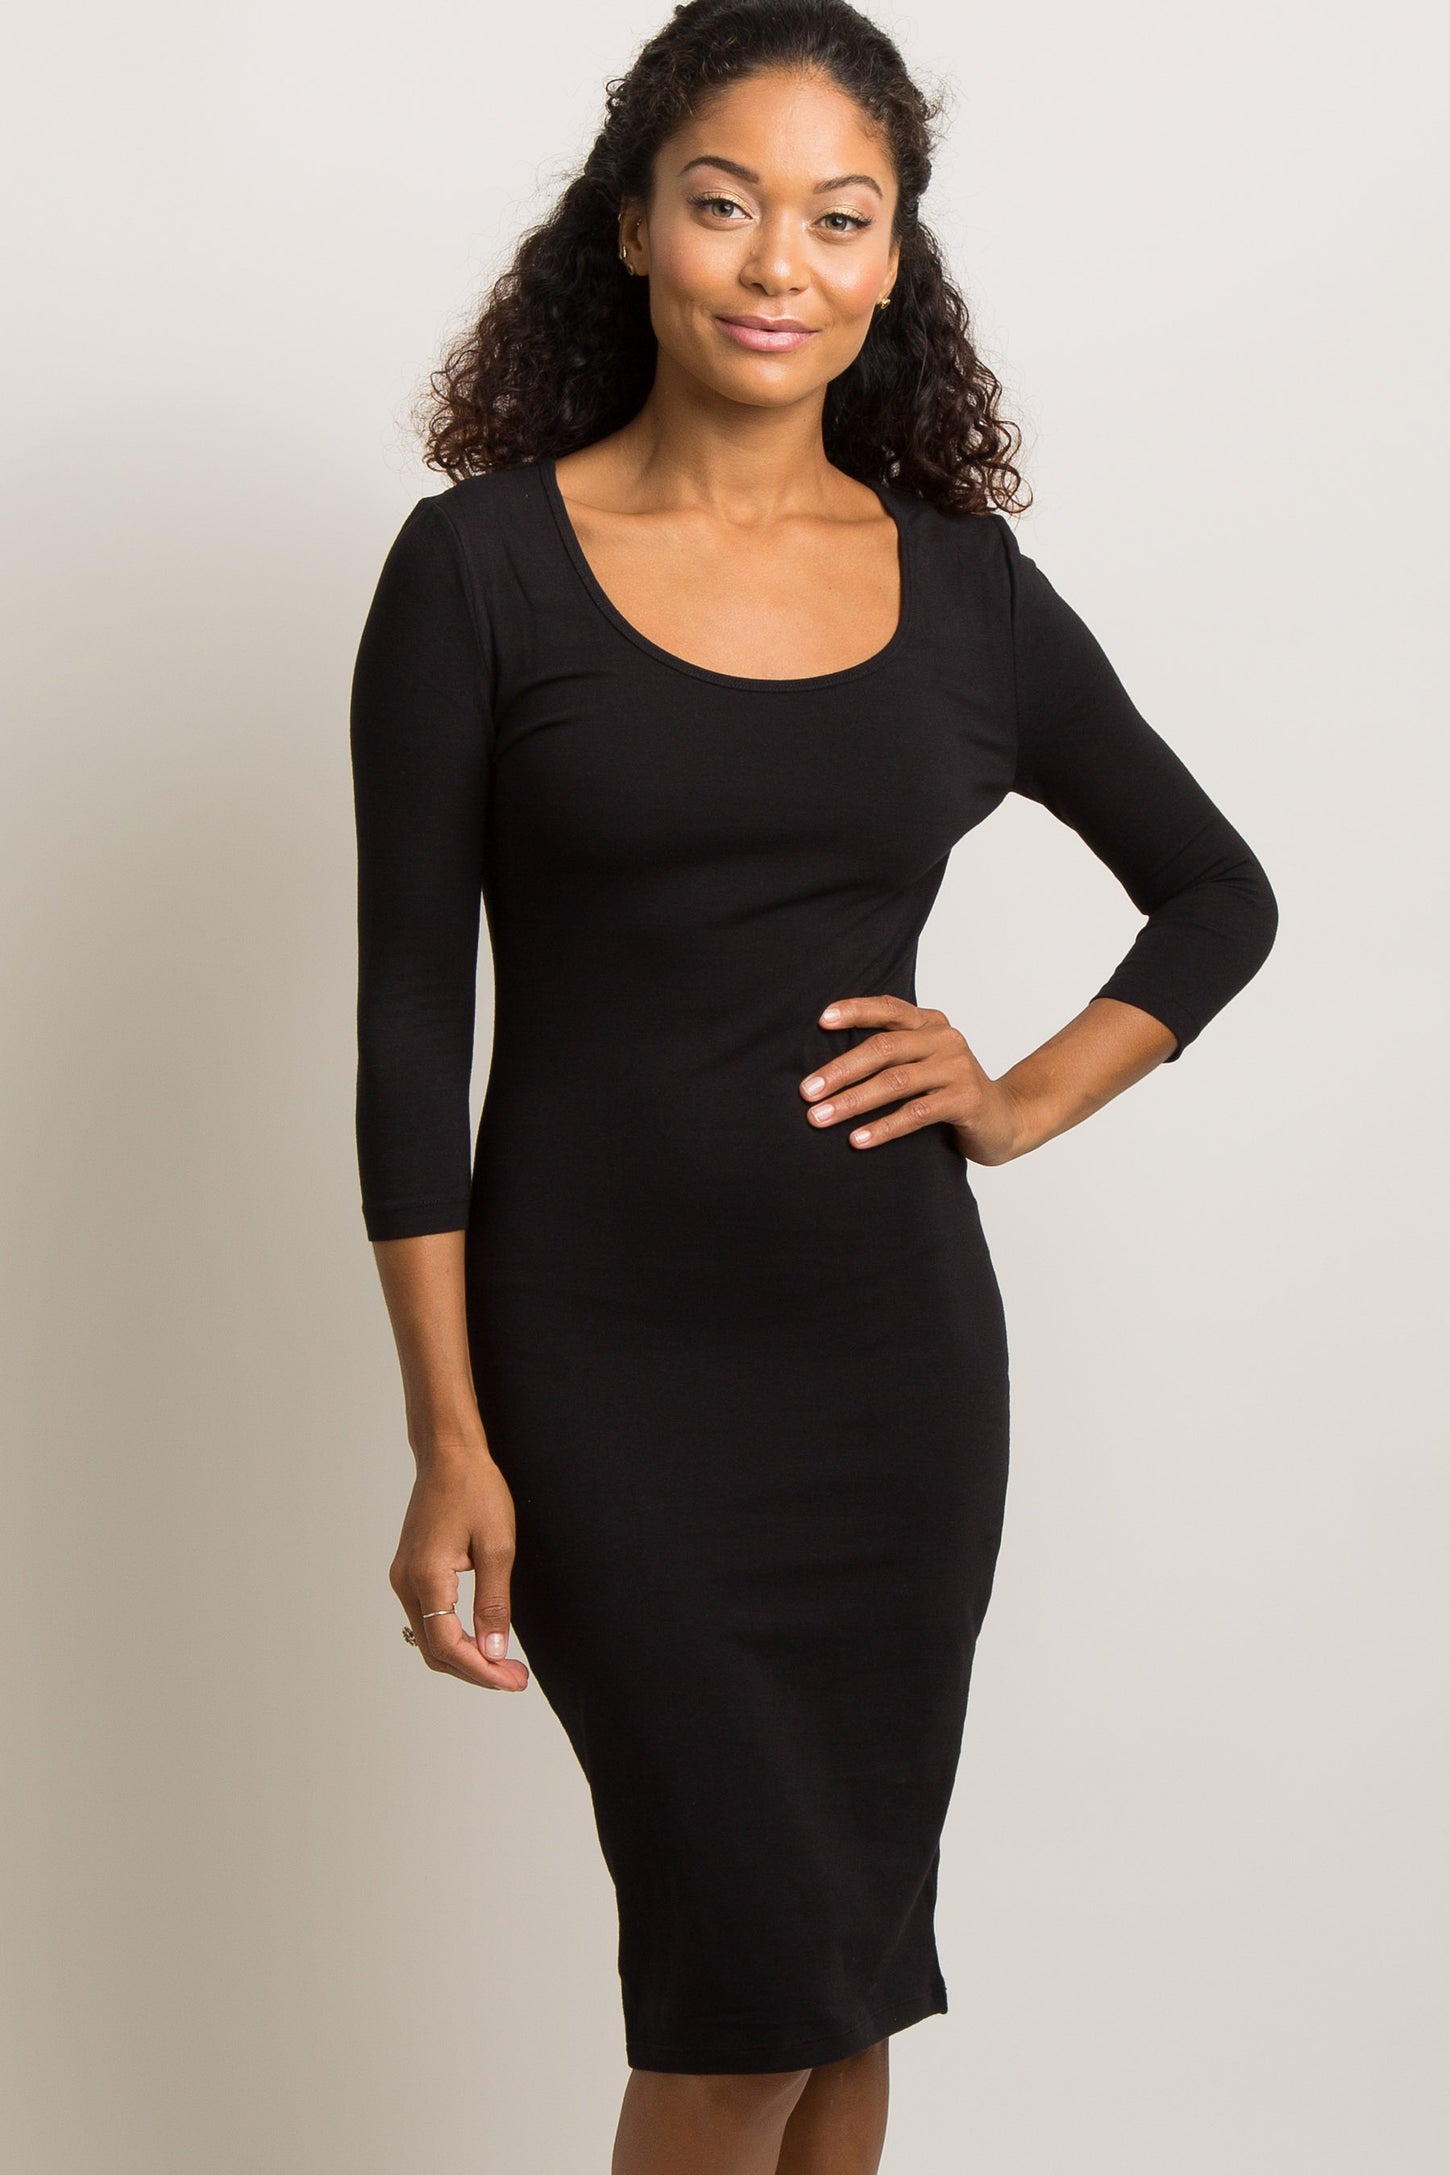 Black 3/4 Sleeve Fitted Dress